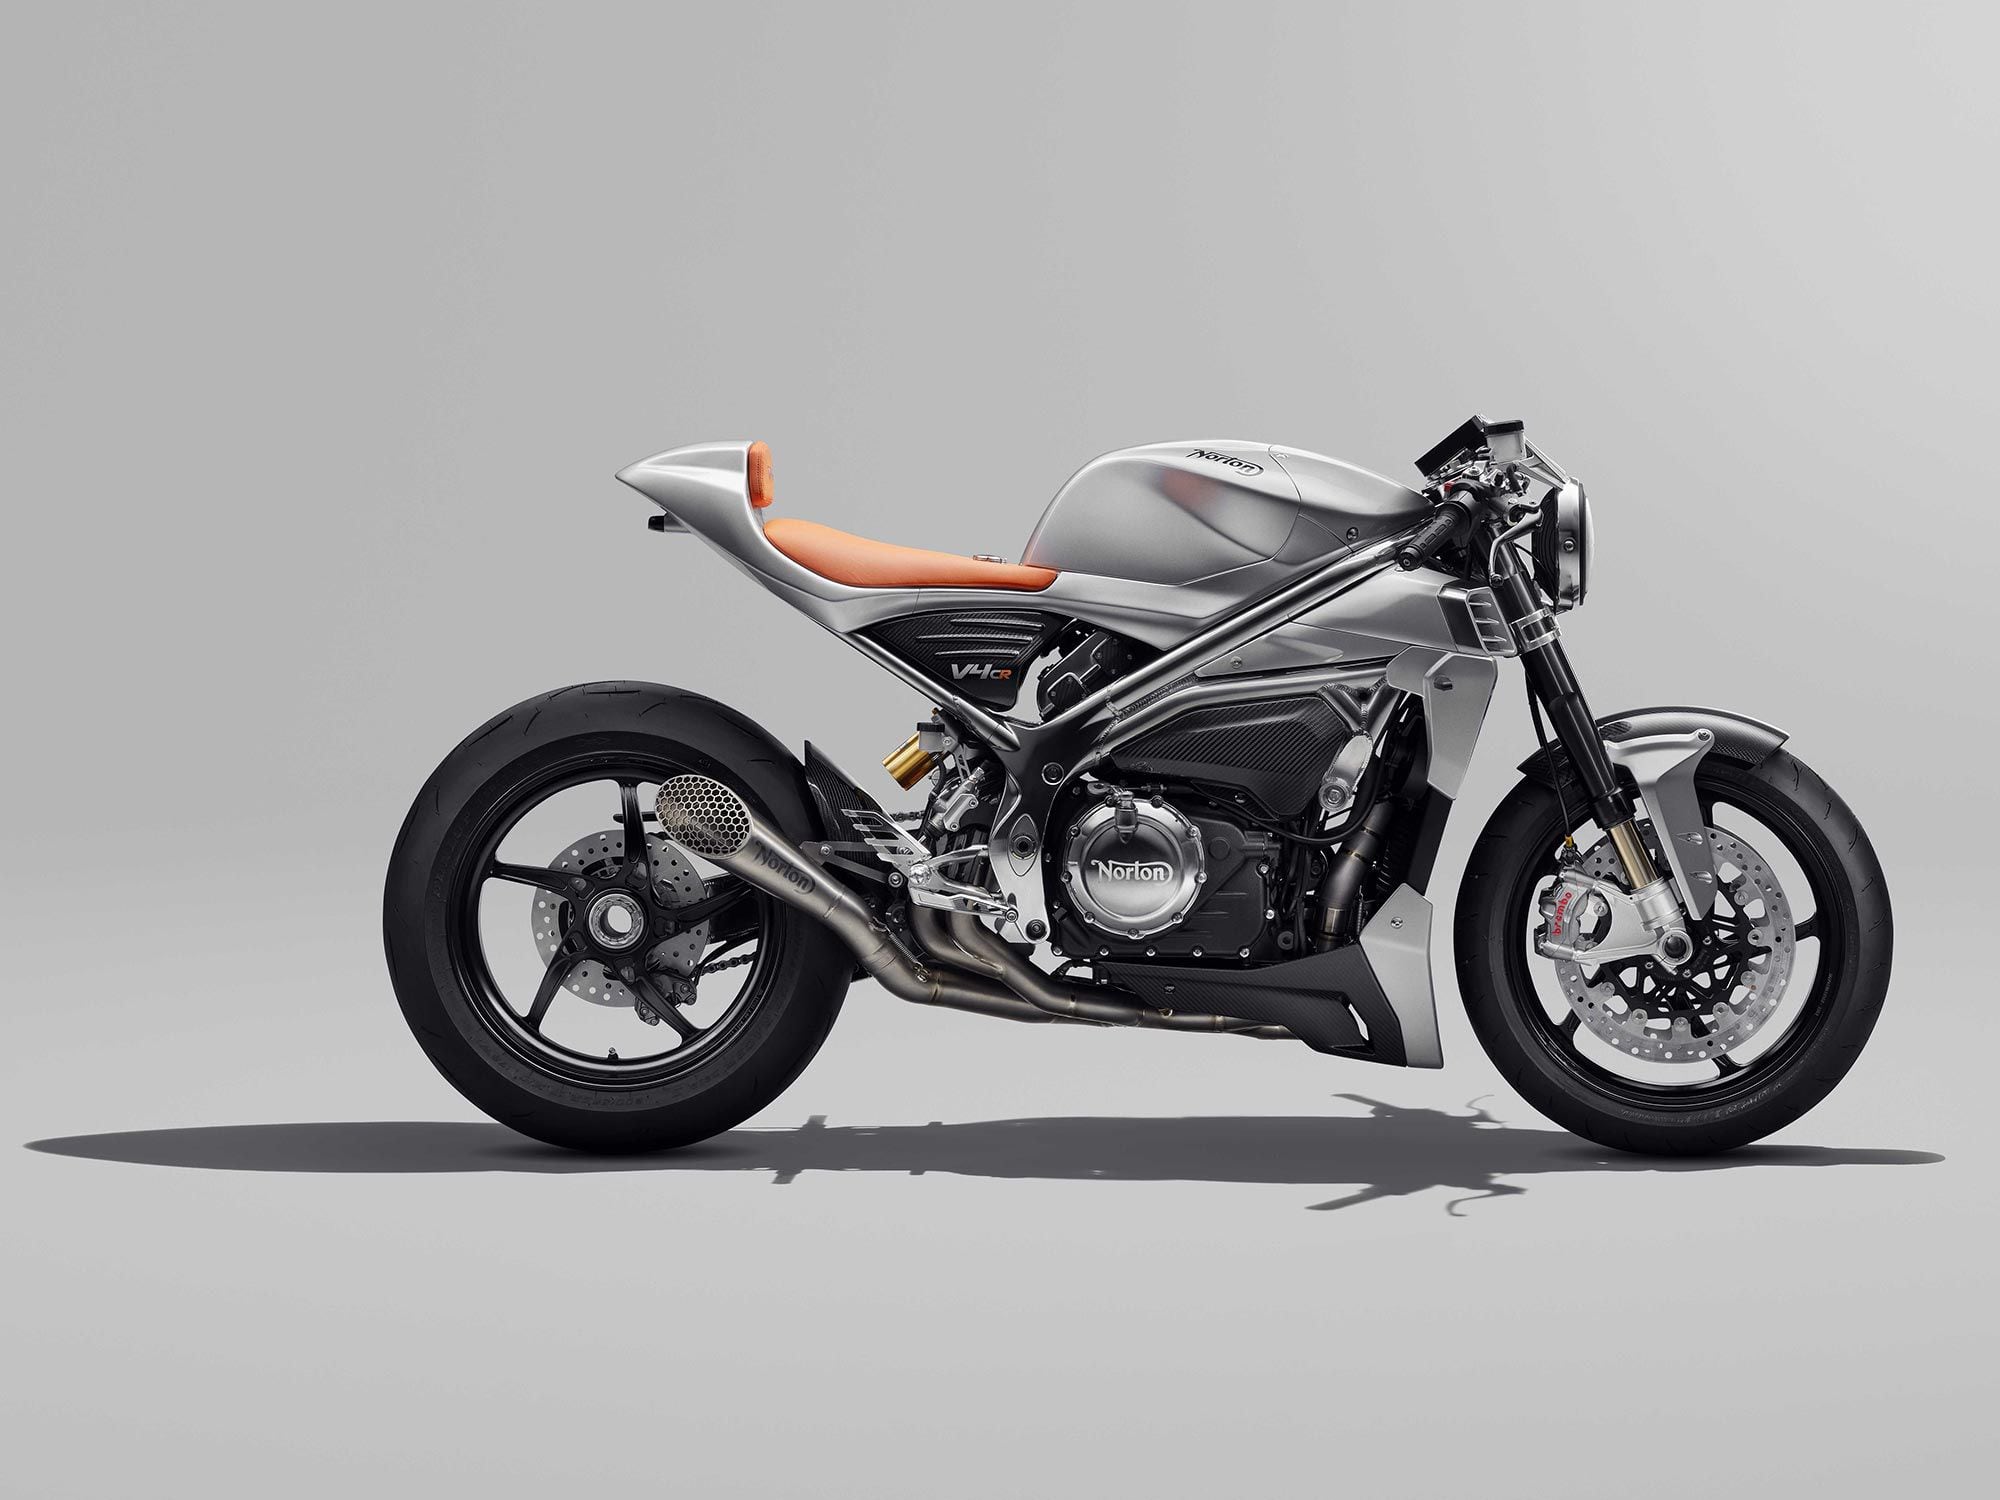 The prototype retains the bones of the 1,200cc superbike, but covers it with retro-inspired cafe bodywork.